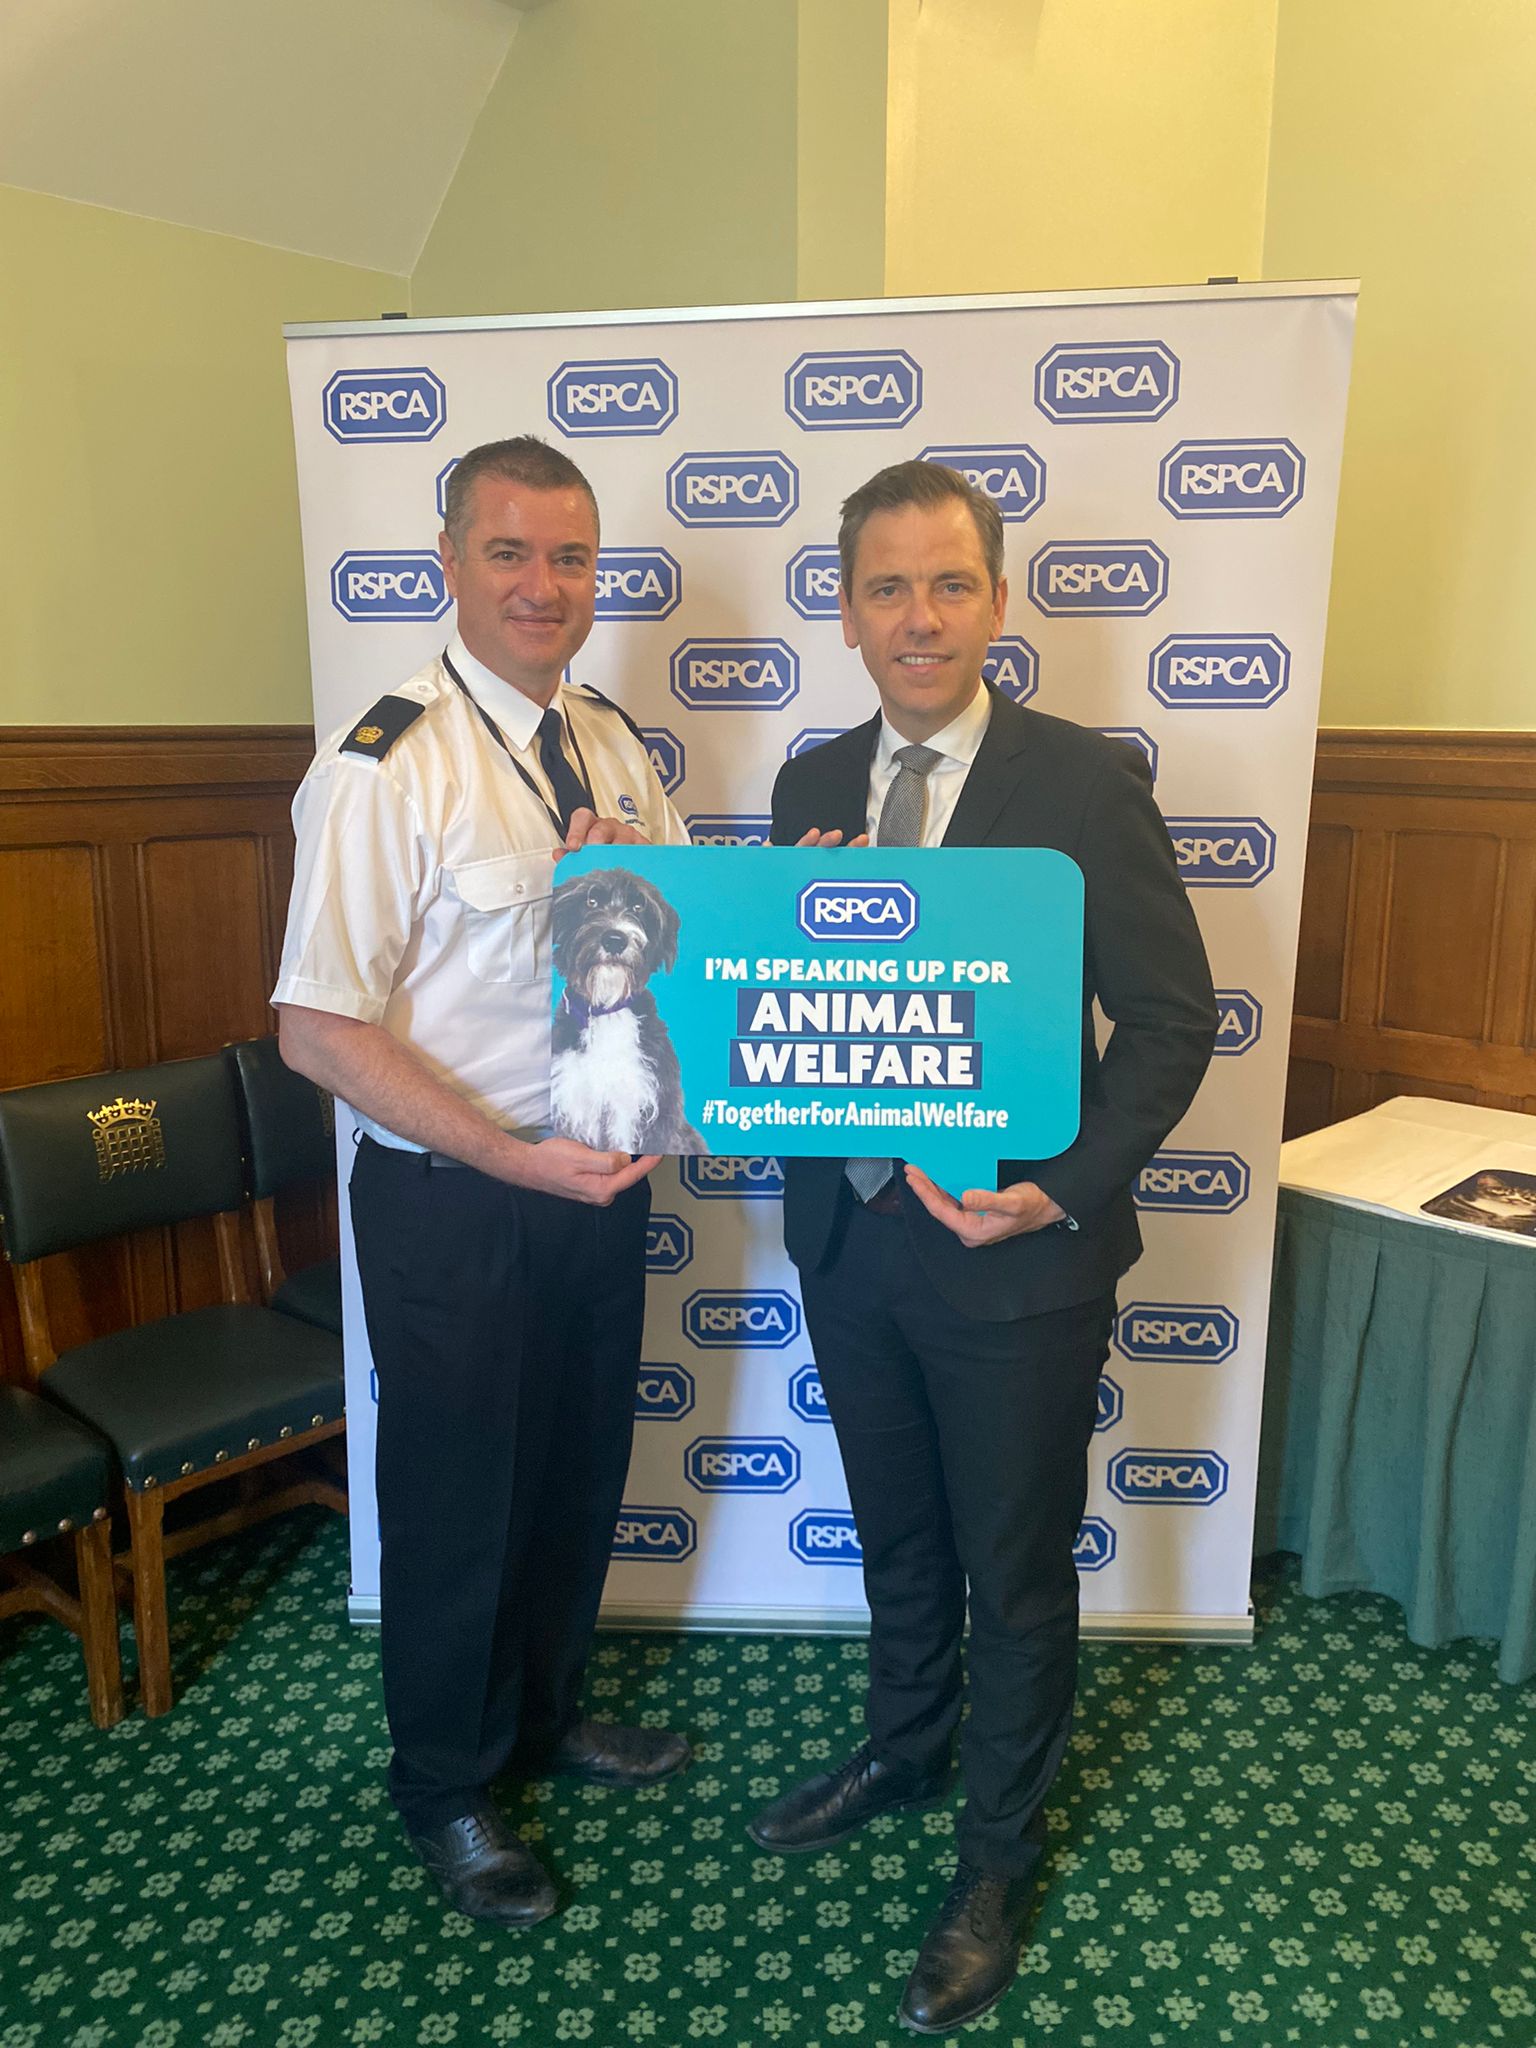 Chris Evans MP holds a sign that reads: I'm speaking up for Animal Welfare #TogetherForAnimalWelfare